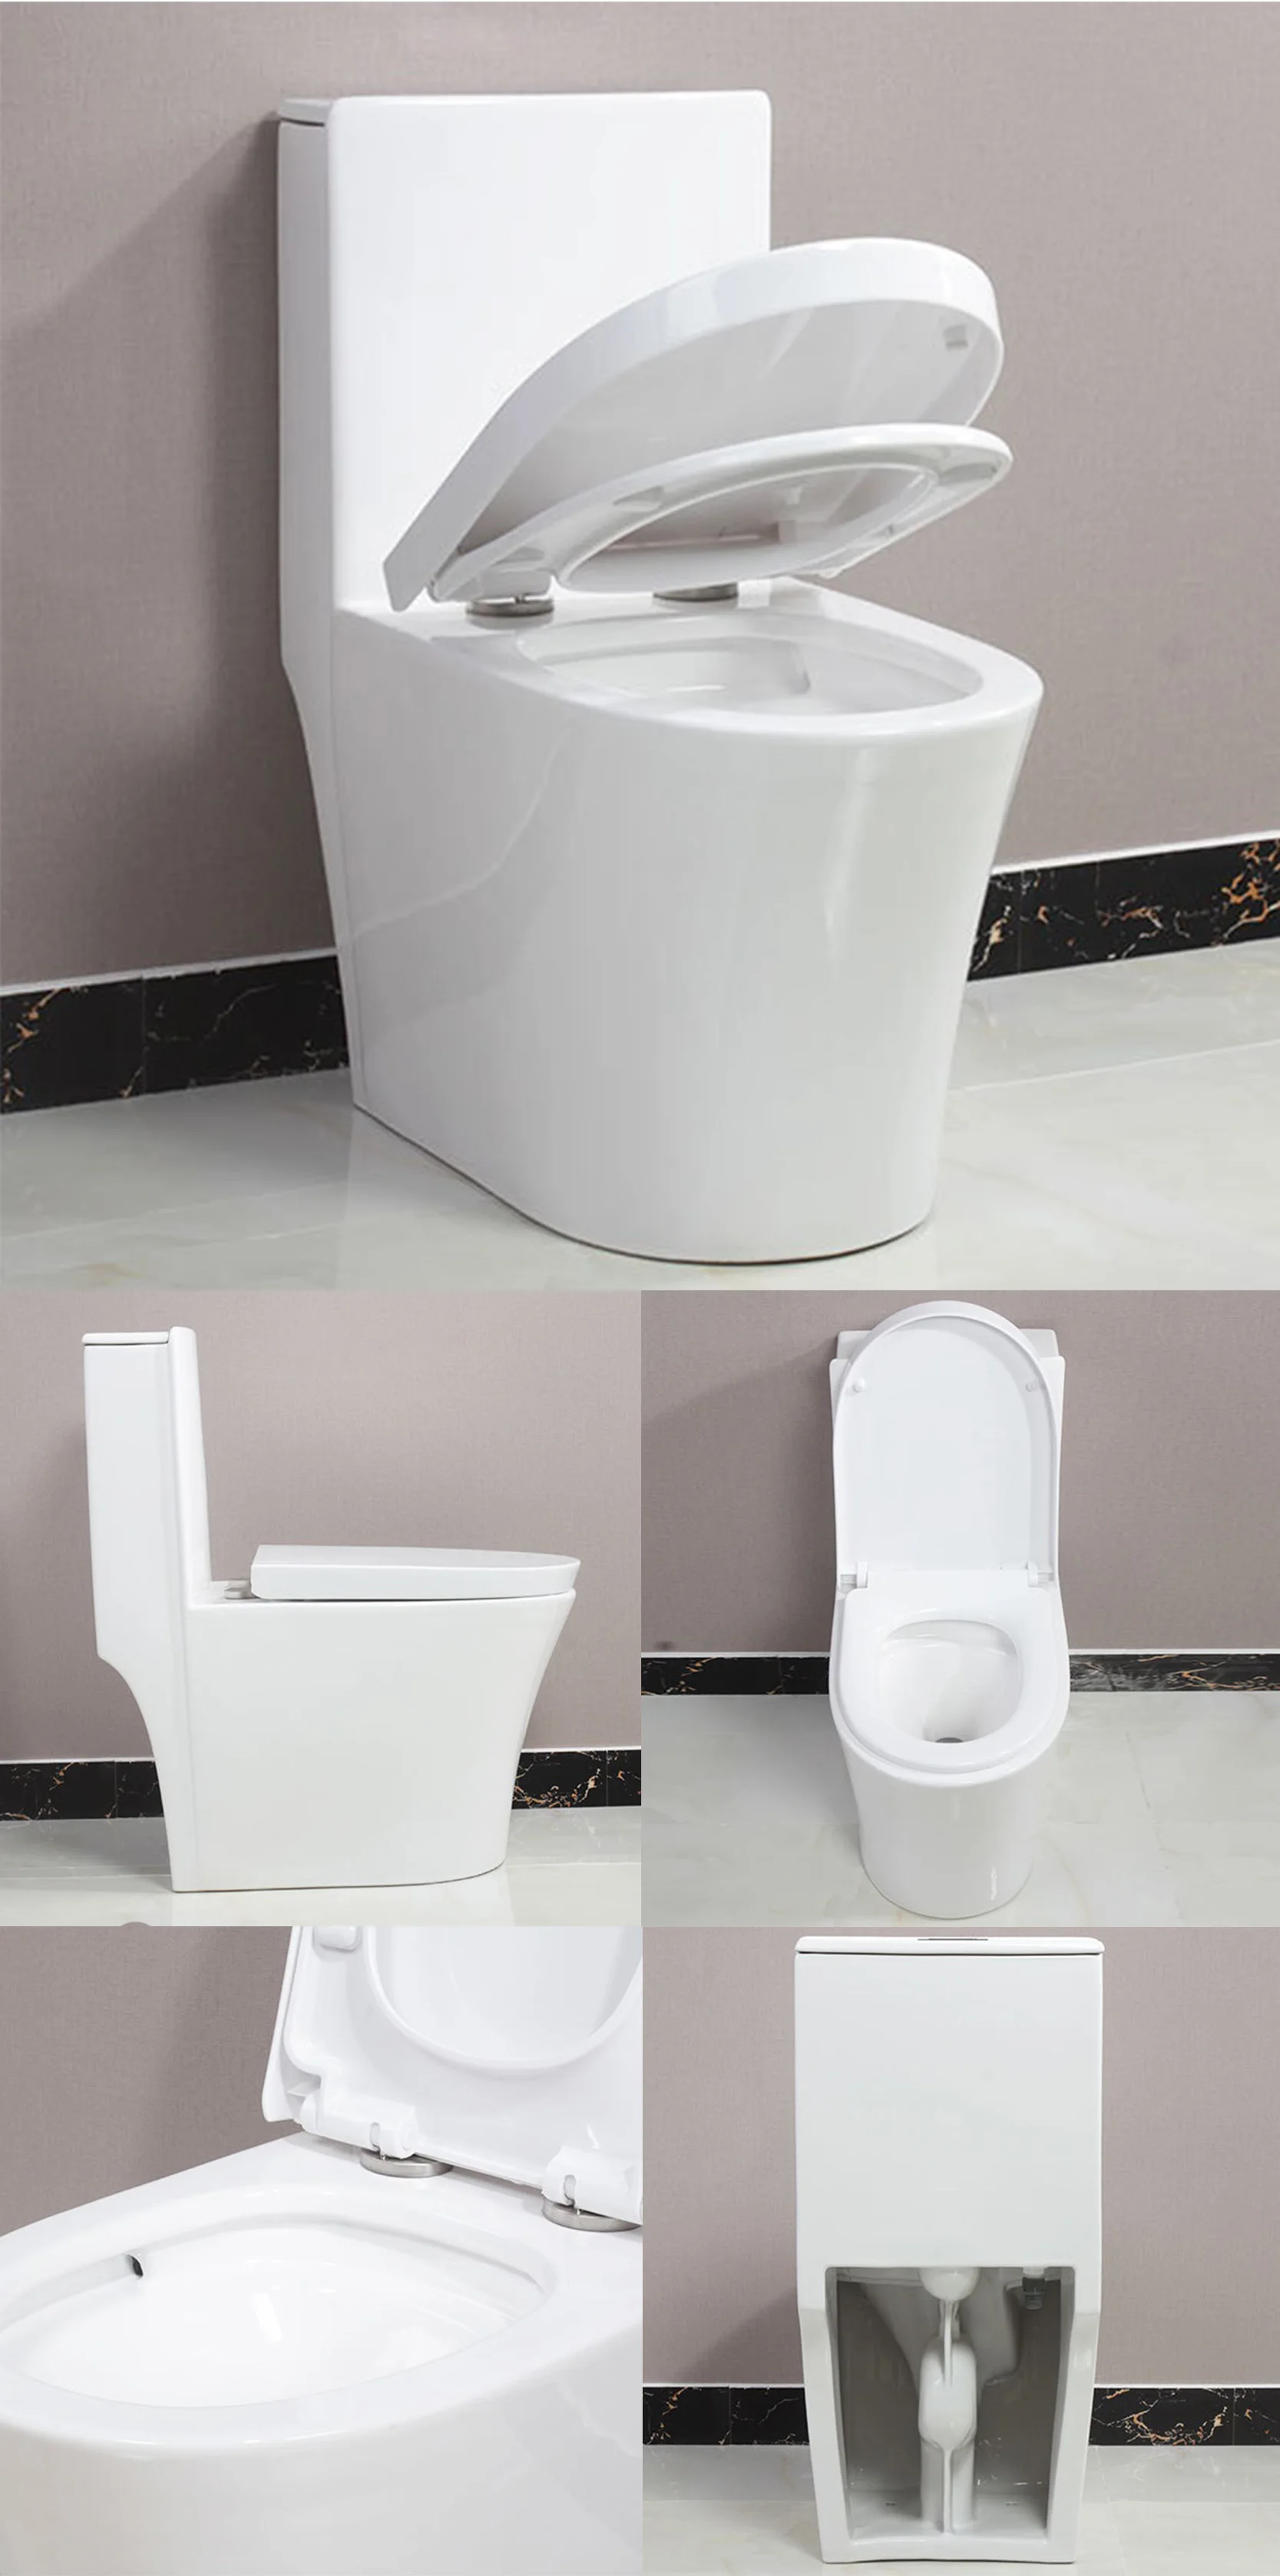 JOININ chaozhou supplier bathroom Tornado one piece toilet with high quality JY1314